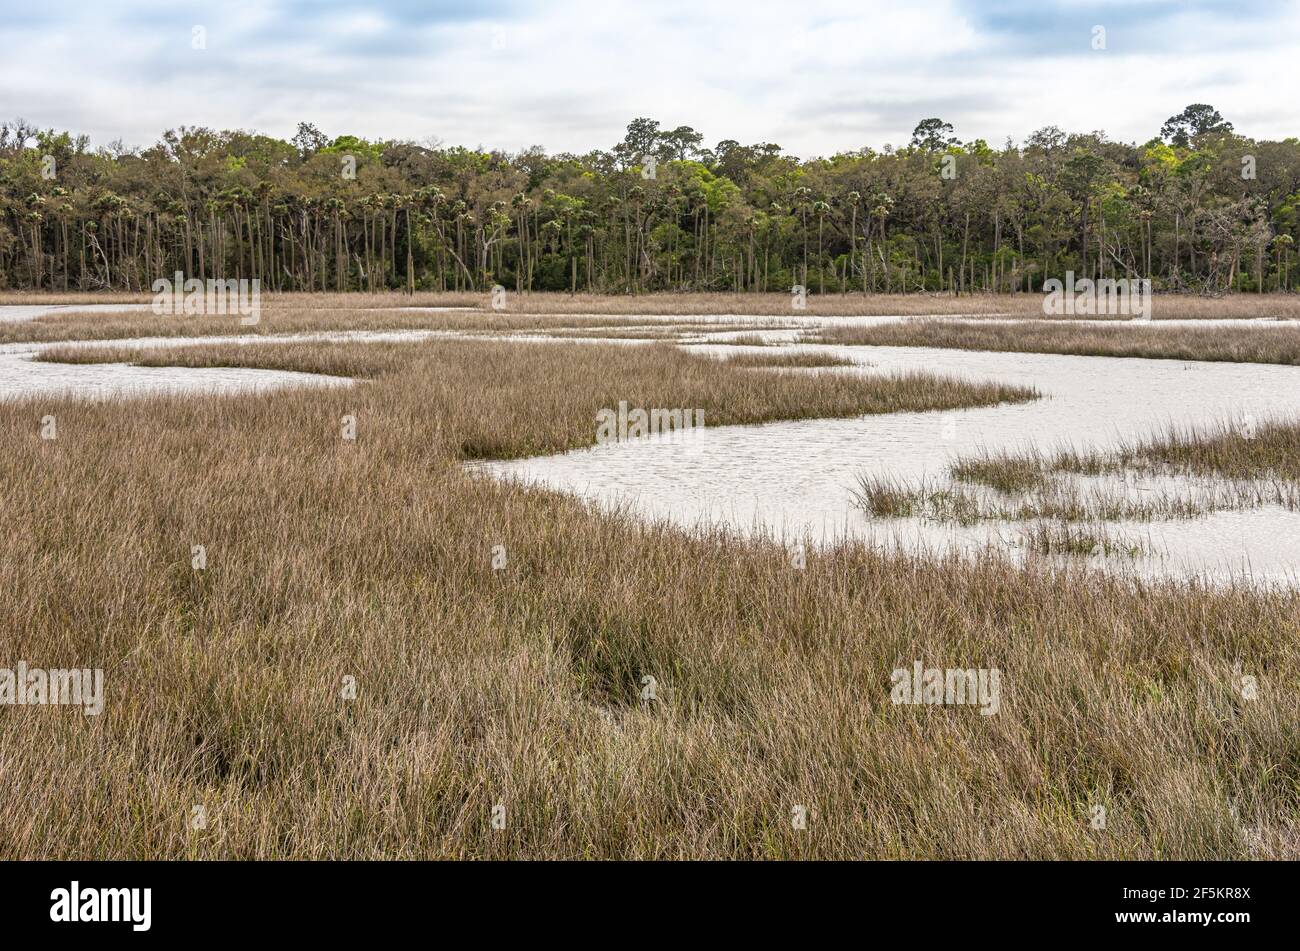 Round Marsh in the Theodore Roosevelt Area of the Timucuan Ecological and Historic Preserve near the St. Johns River in Jacksonville, Florida. (USA) Stock Photo